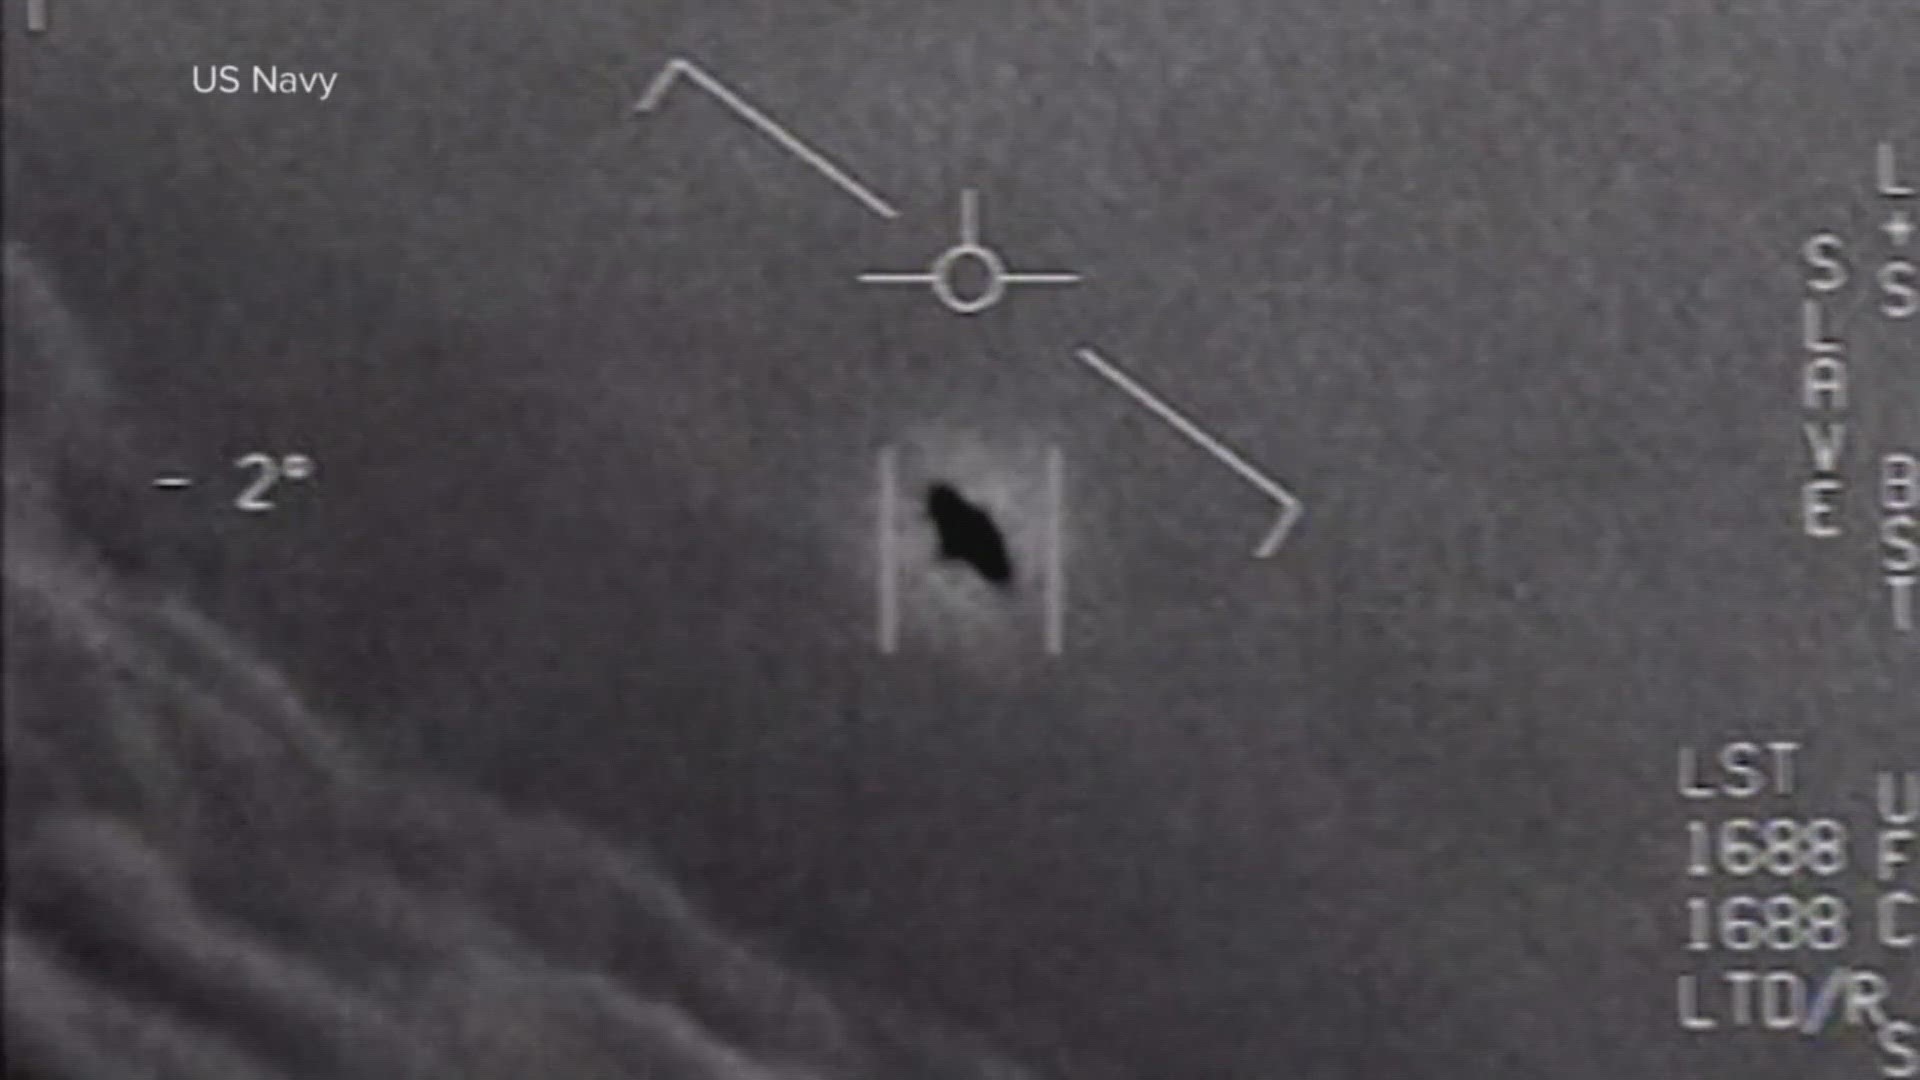 NASA said the study of UFOs will require new scientific techniques, including advanced satellites as well as a shift in how unidentified flying objects are perceived